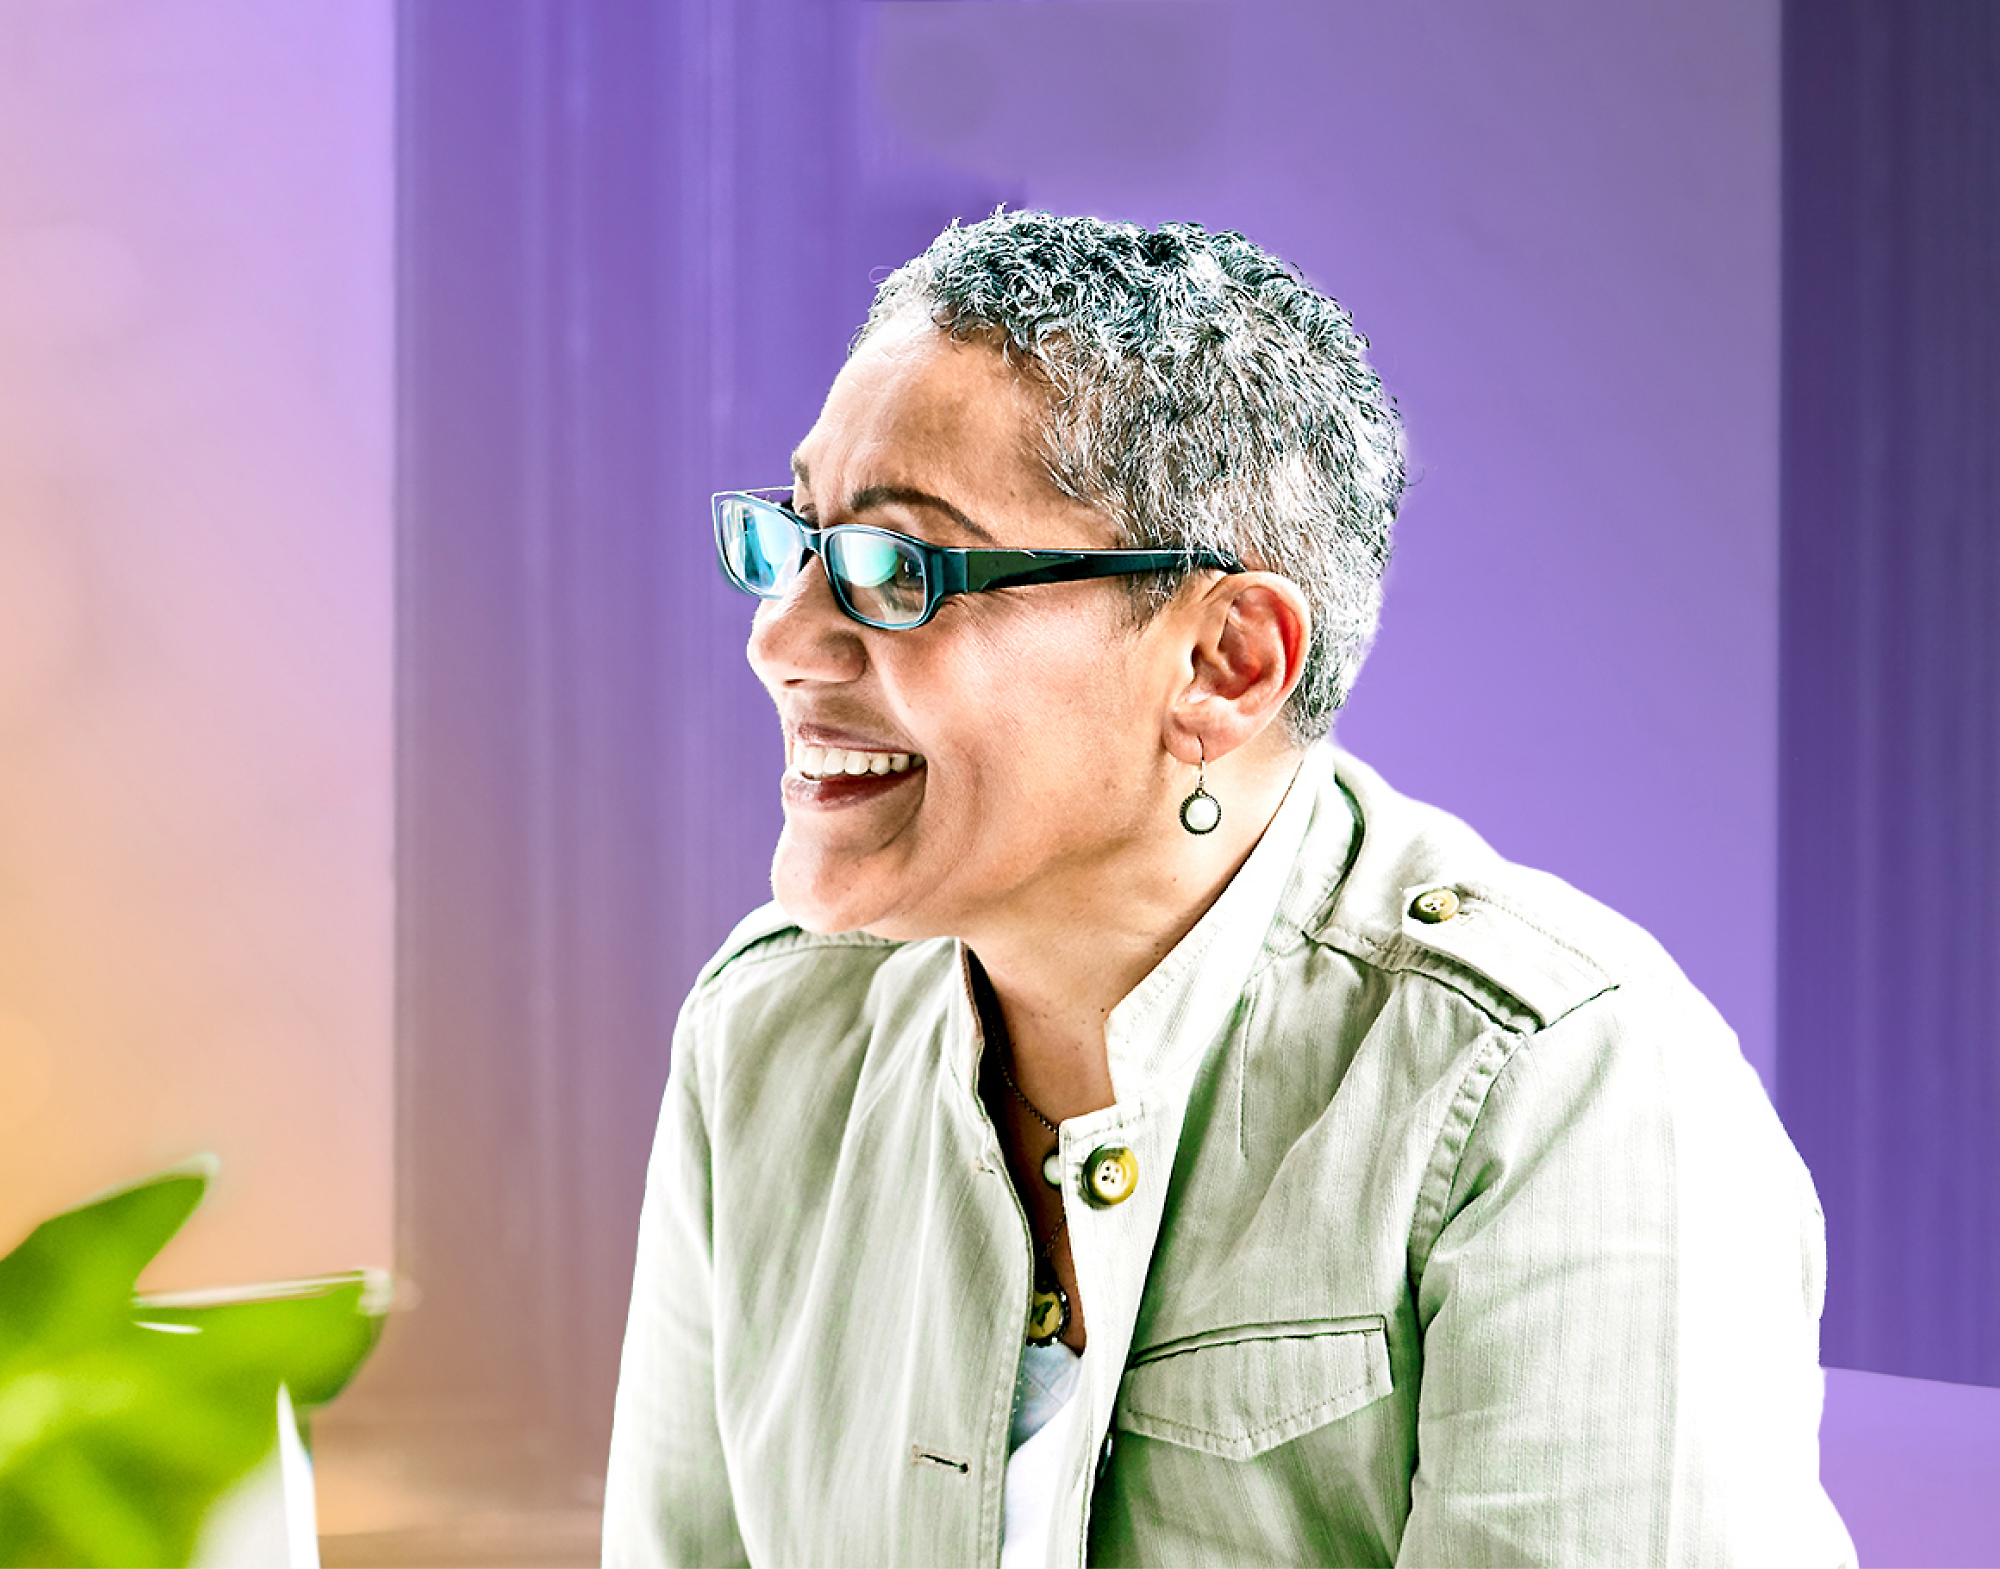 Mature woman with short gray hair and glasses, laughing, wearing a light green jacket, 